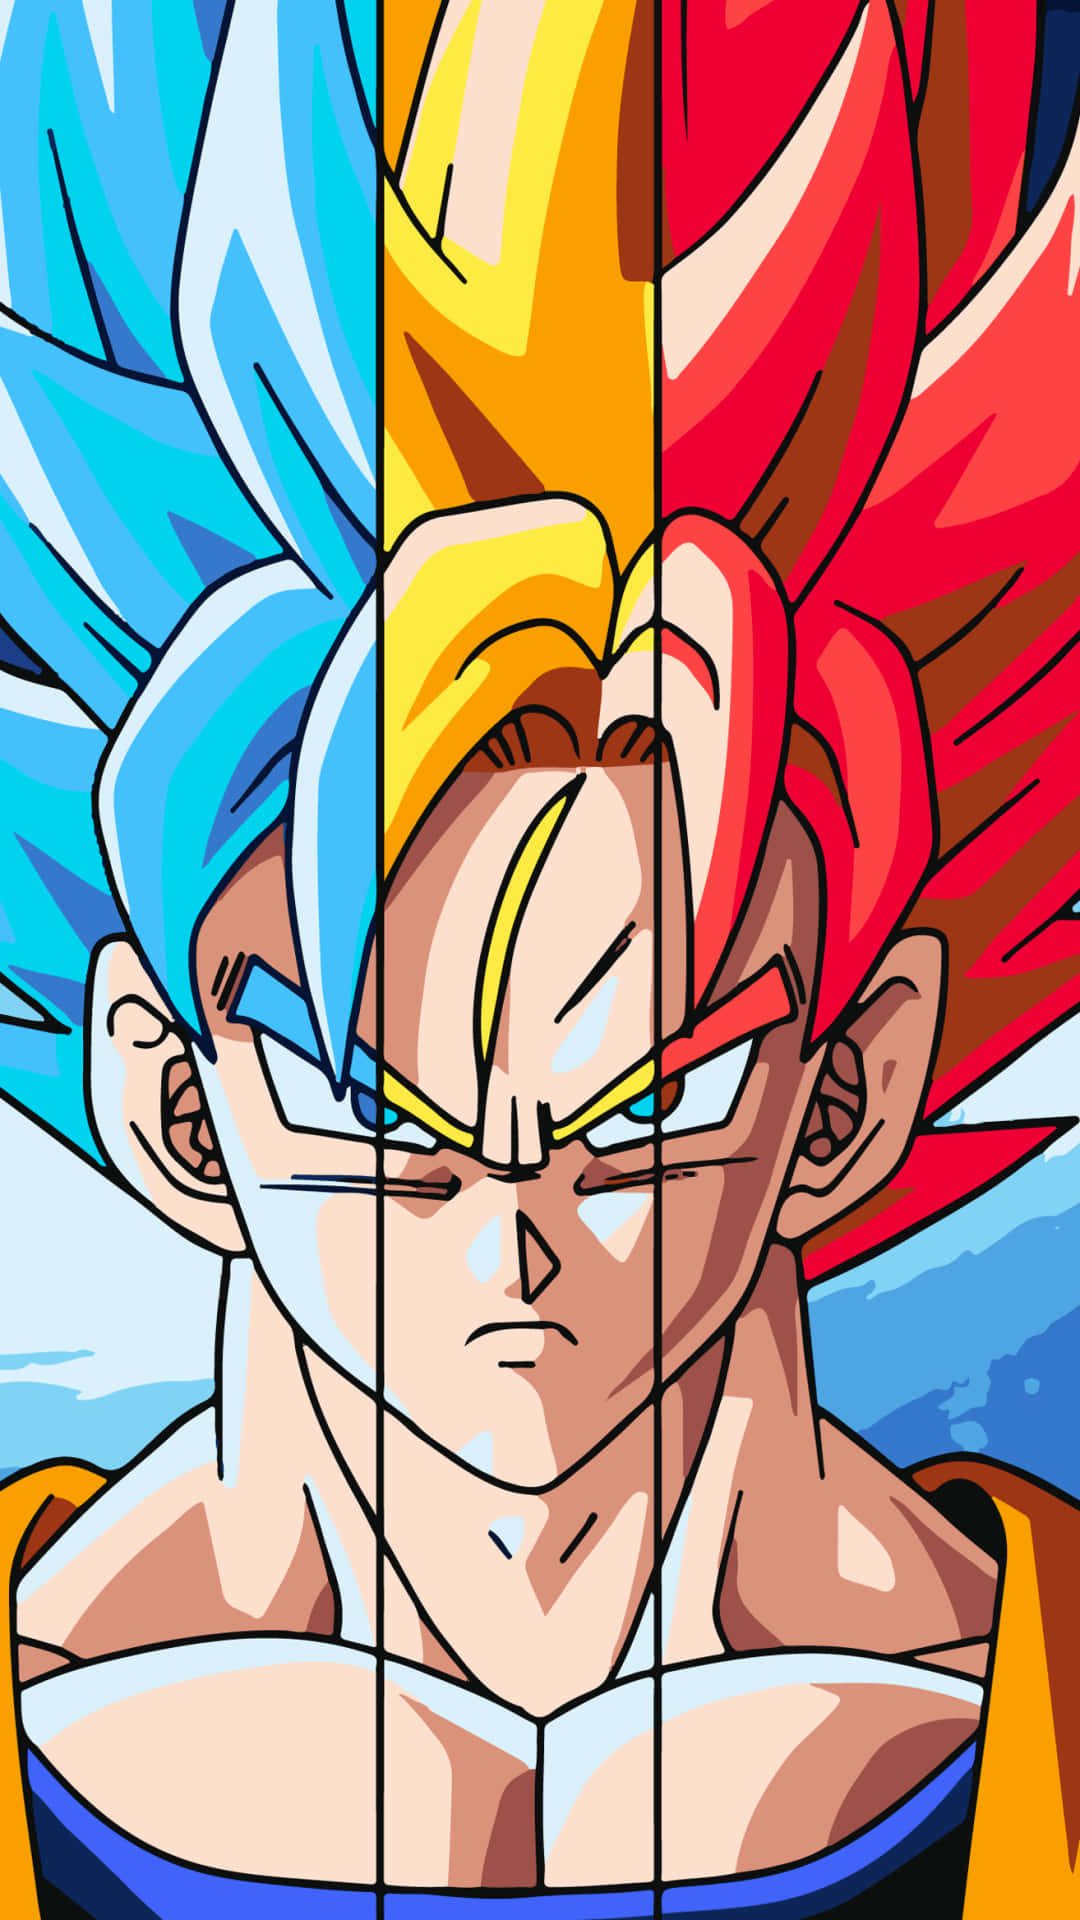 Get ready to experience the action and adventure of Dragon Ball Super on your iPhone! Wallpaper